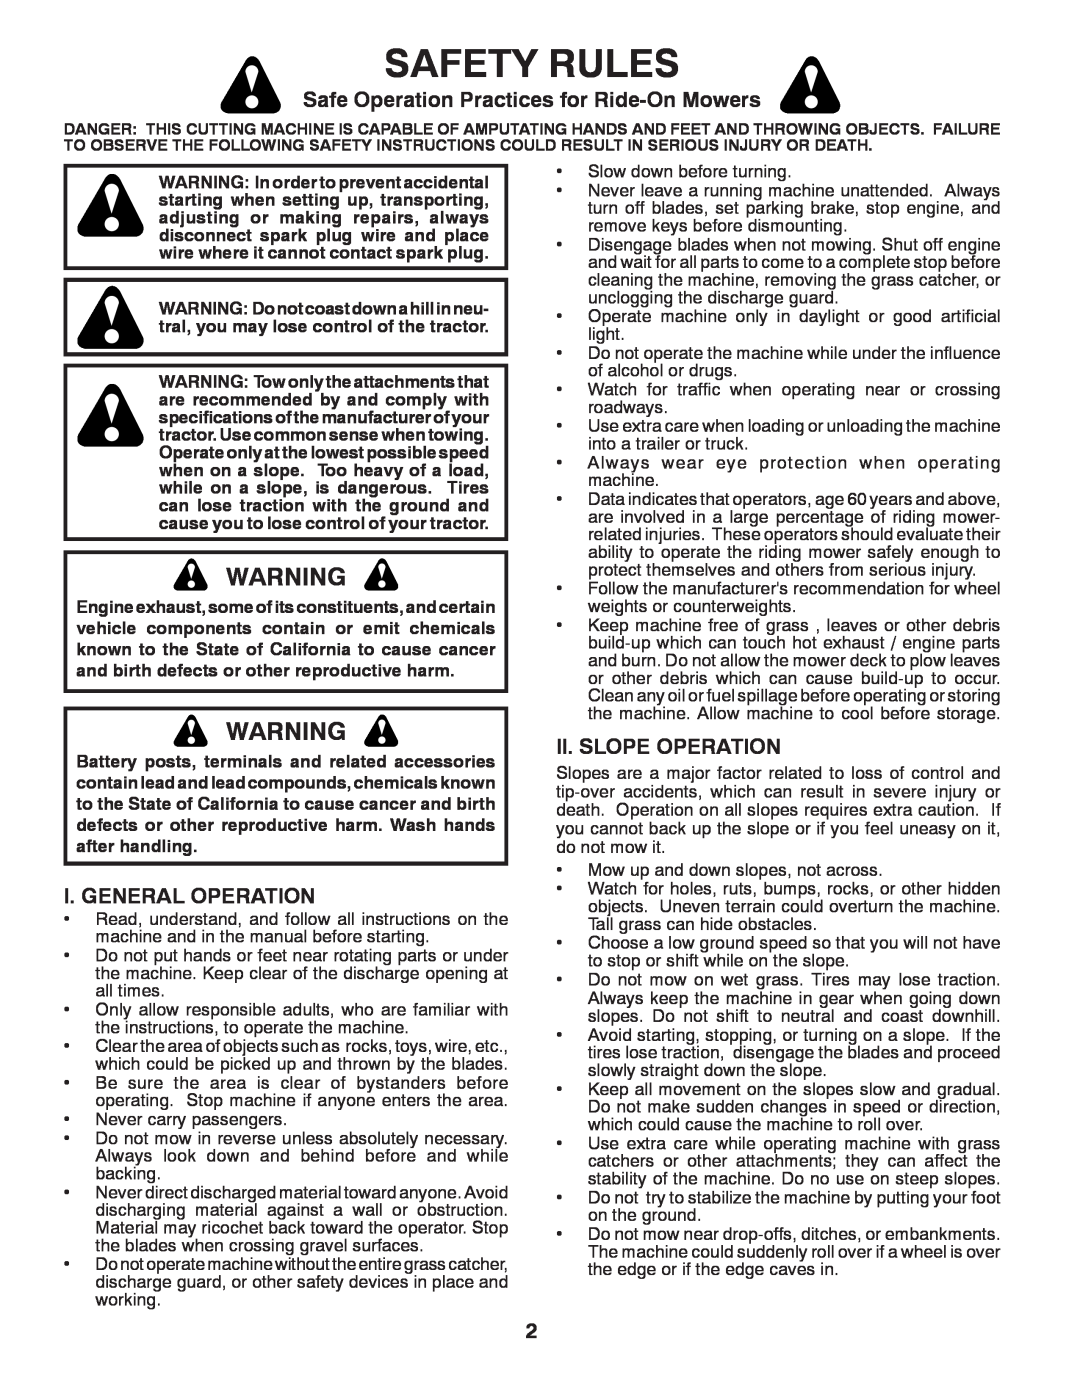 Poulan PXT12530 manual Safety Rules, Safe Operation Practices for Ride-On Mowers, I. General Operation, Ii. Slope Operation 